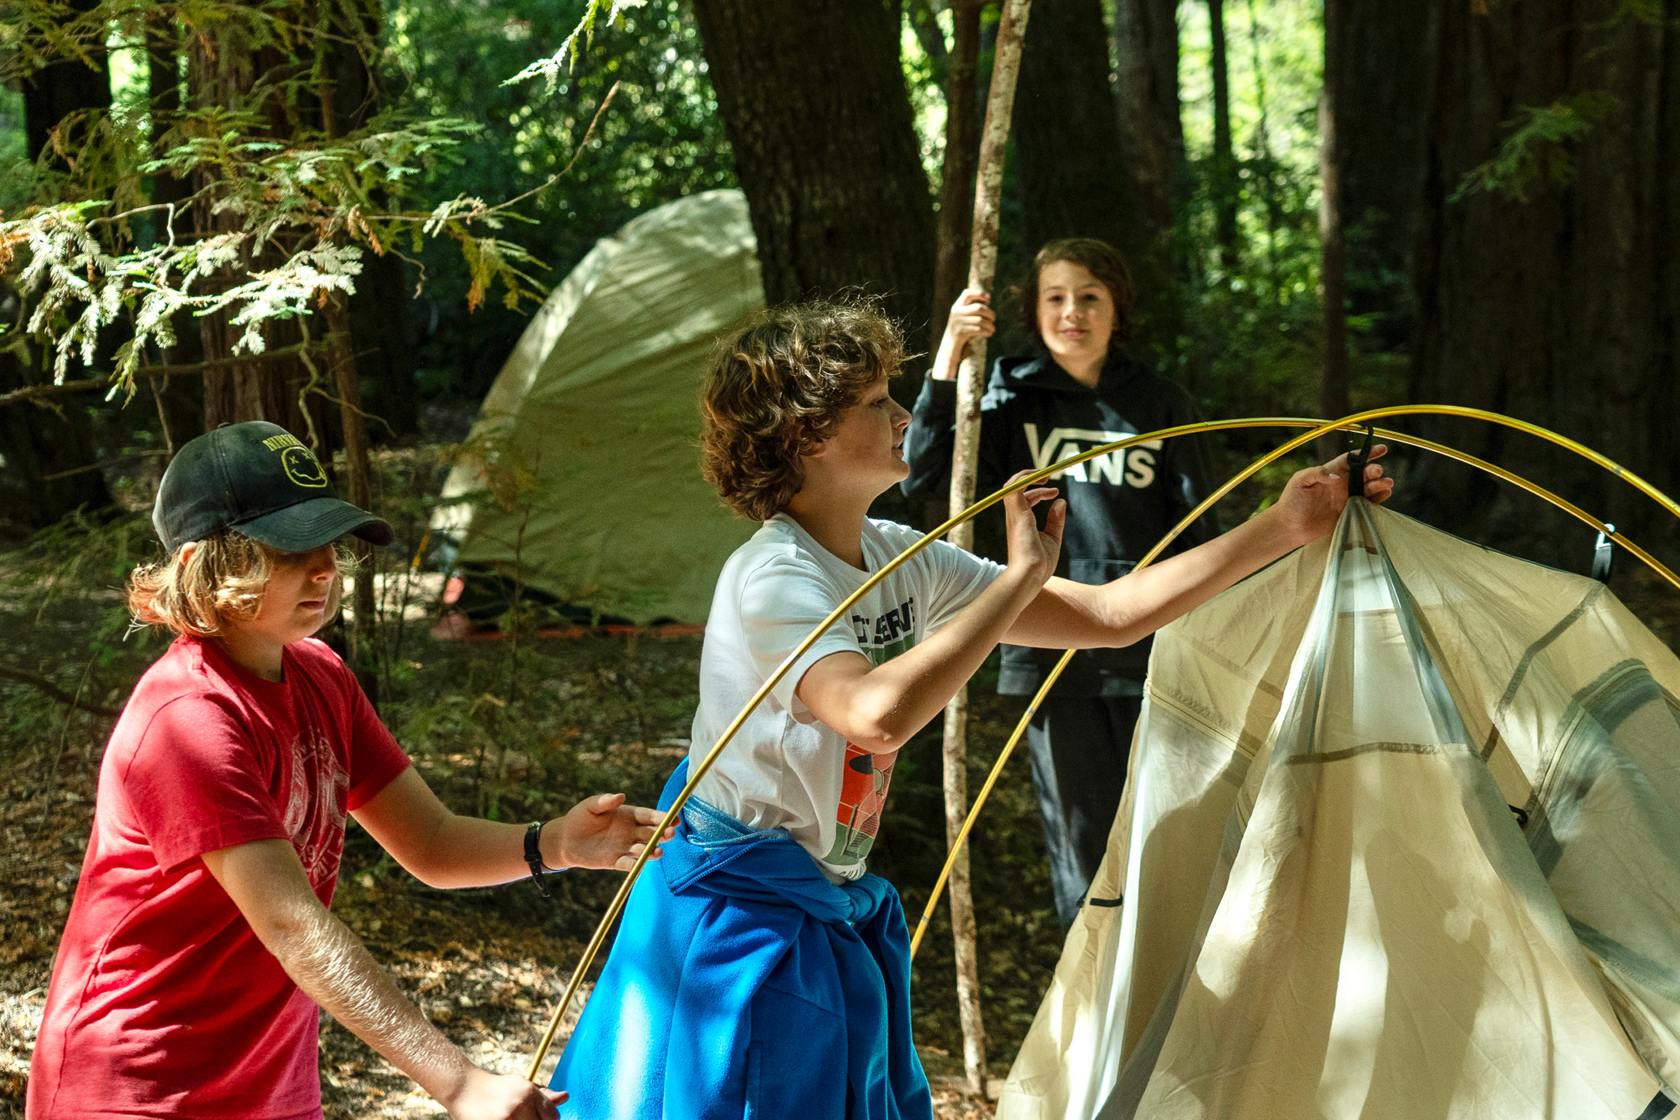 Three campers working together to set up a tent in the woods.